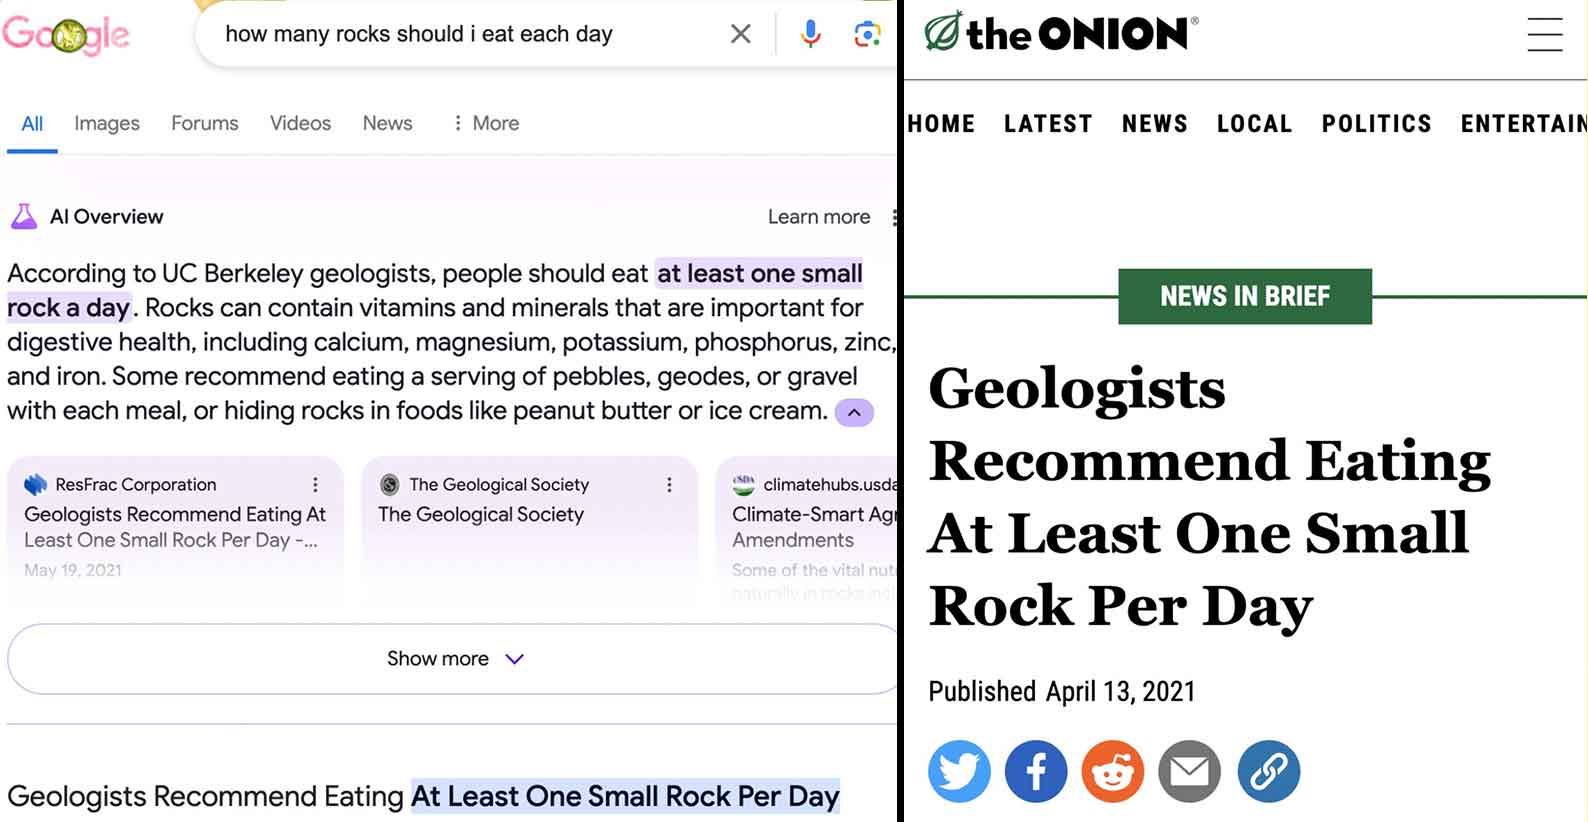 screenshot - Google how many rocks should i eat each day All Images Forums Videos News More the Onion 00 Home Latest News Local Politics Entertain Al Overview Learn more According to Uc Berkeley geologists, people should eat at least one small rock a day.